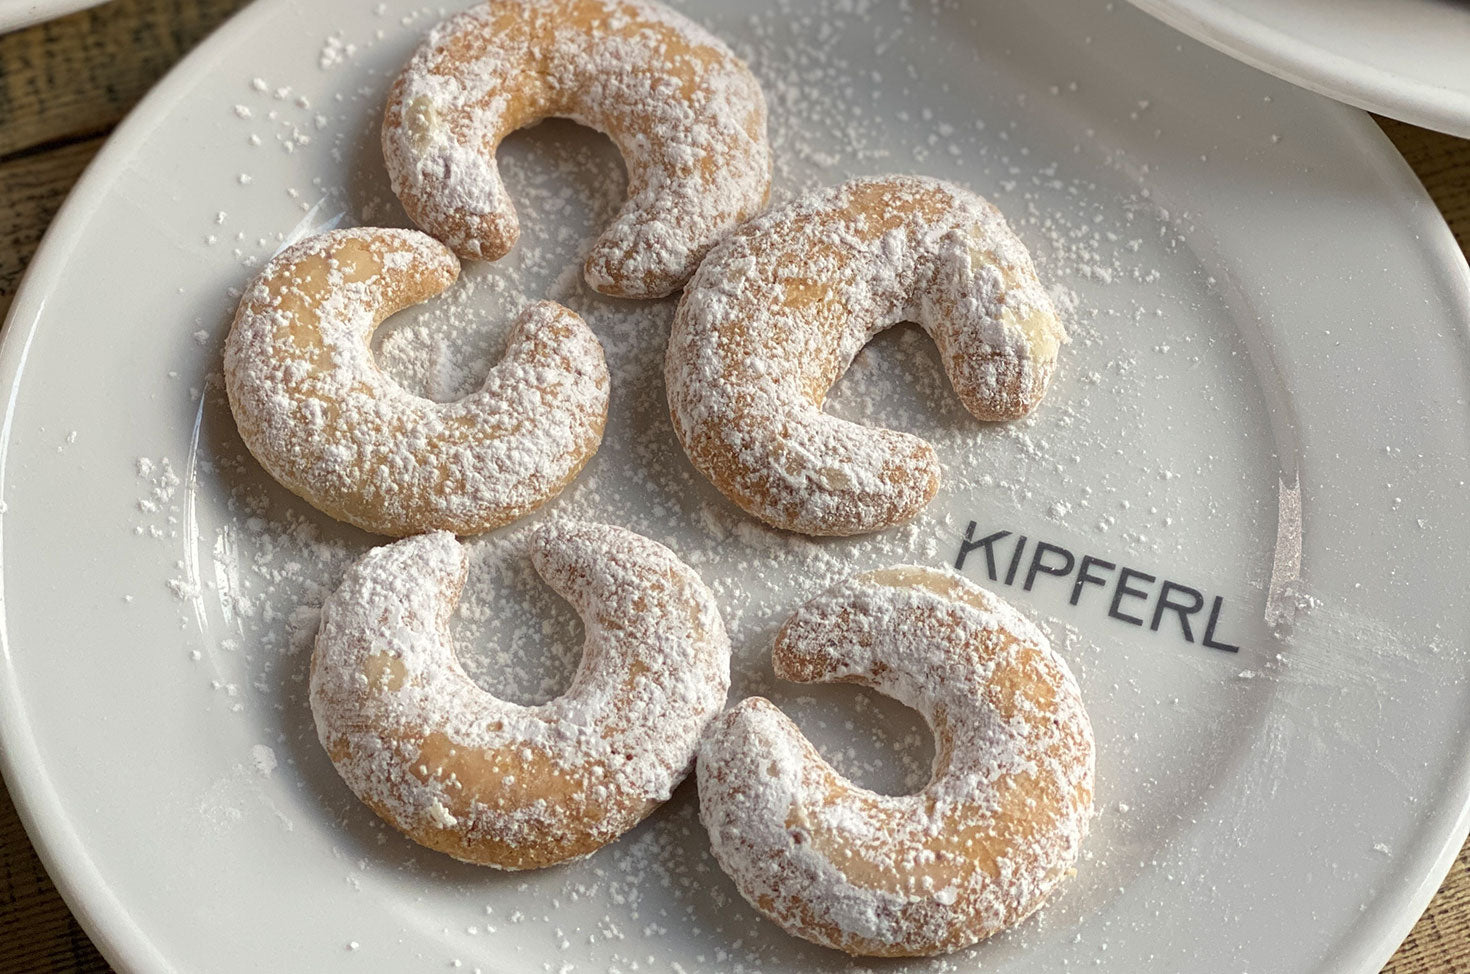 The true meaning of "Kipferl" – From Austria to France to the UK